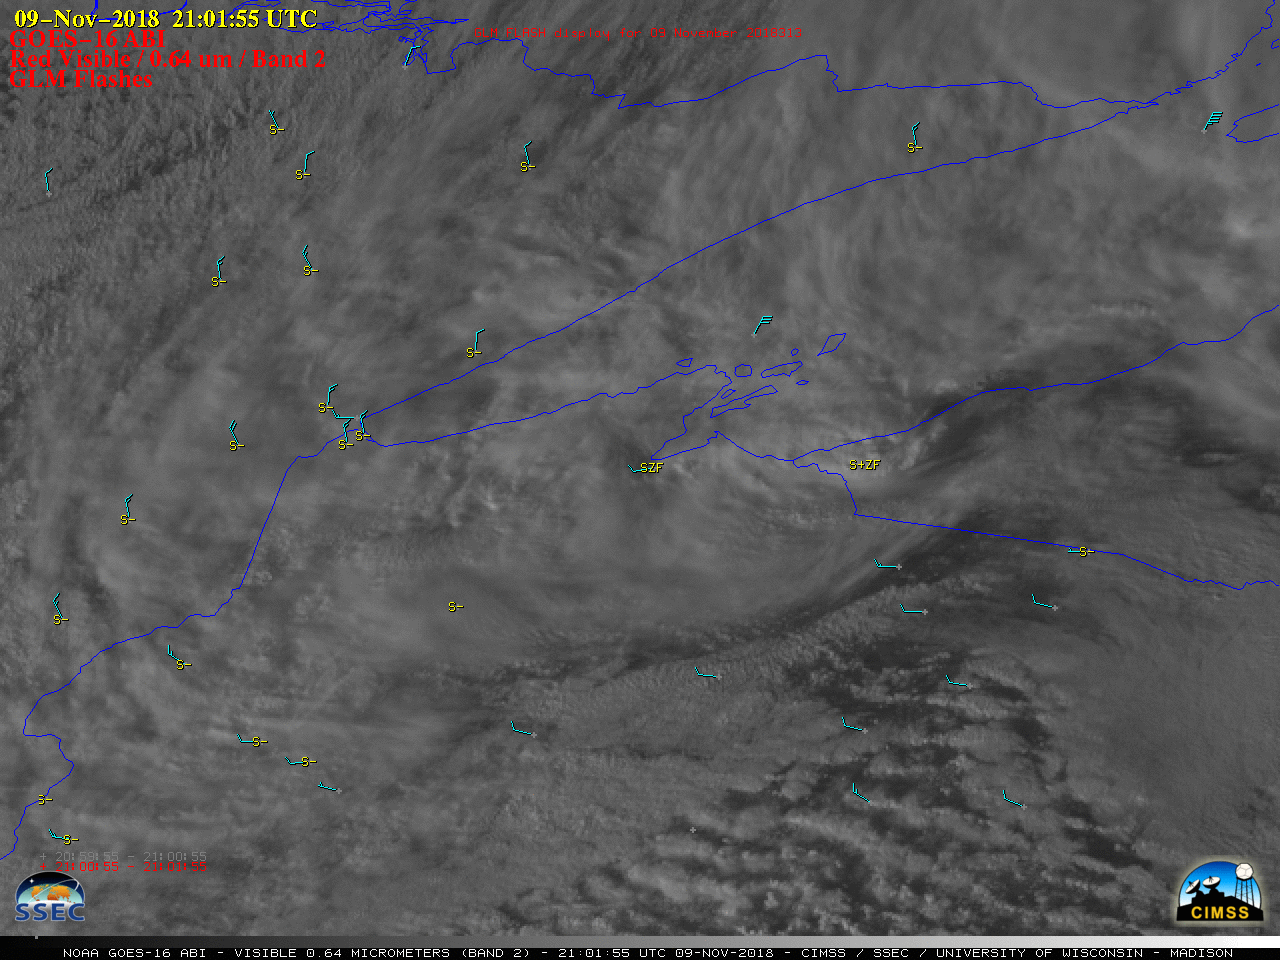 GOES-16 "Red" Visible (0.64 µm) images, with hourly surface weather type plotted in yellow [click to play MP4 animation]